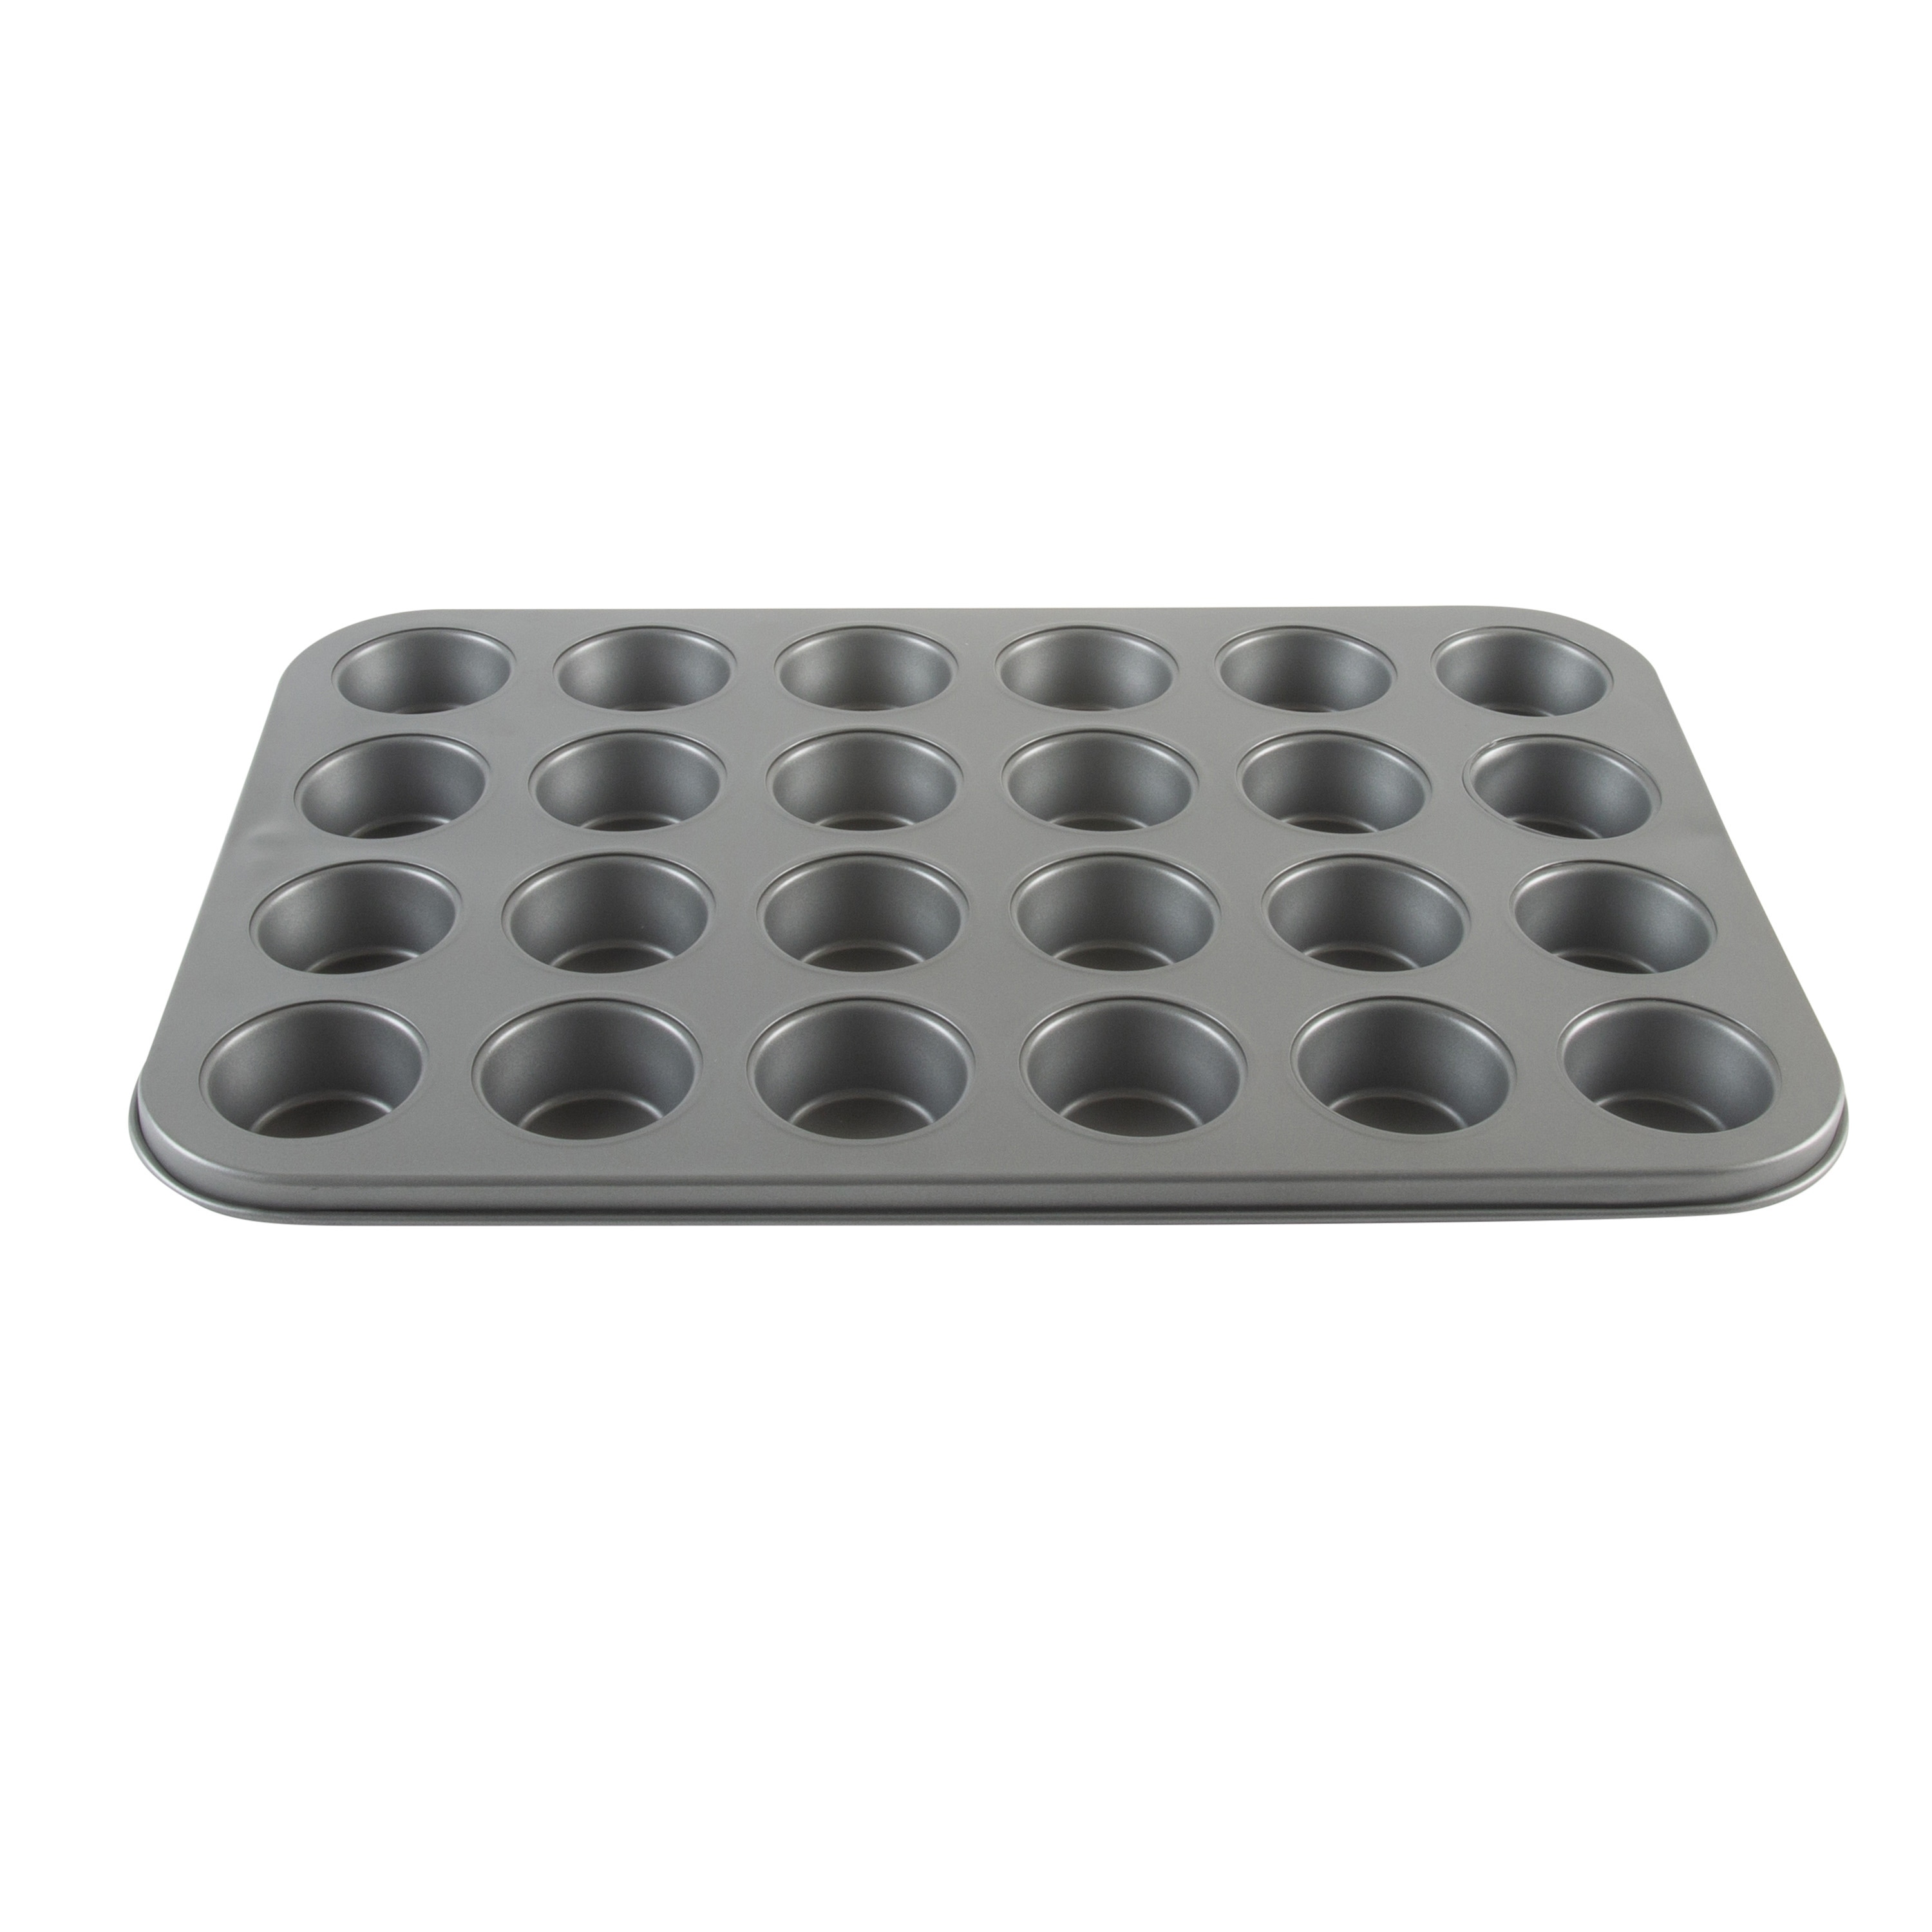 Small Aluminum Pans with Lids 8x8 12 Cup Carbon Steel Muffin